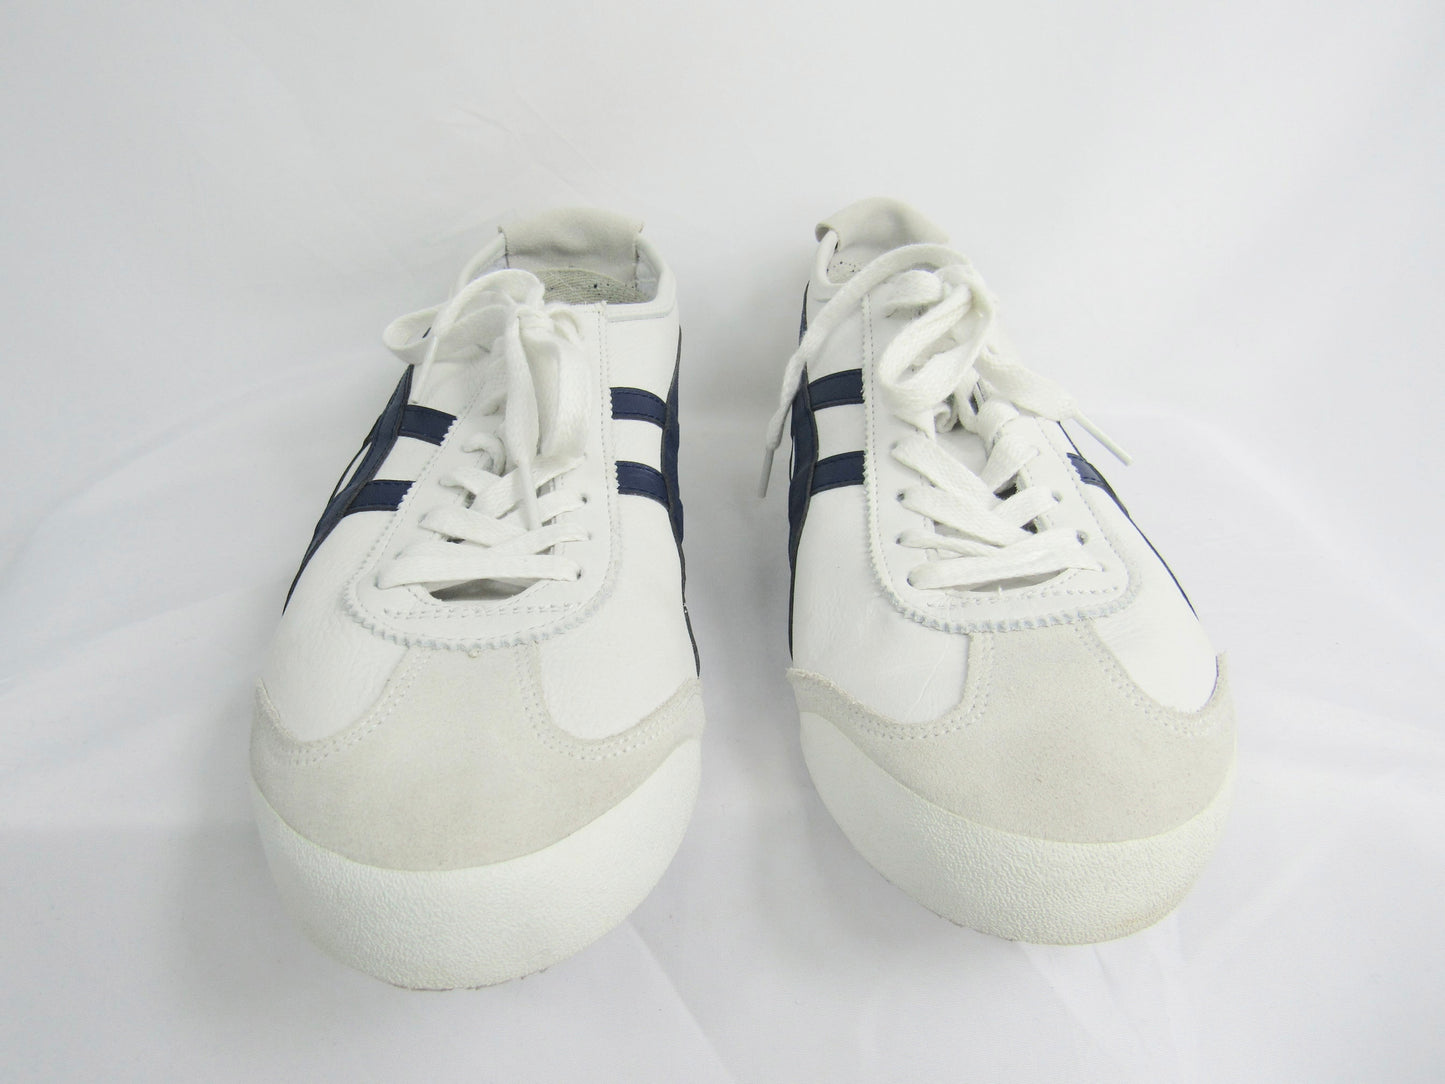 ONITSUKA TIGER Sneakers - Size 11